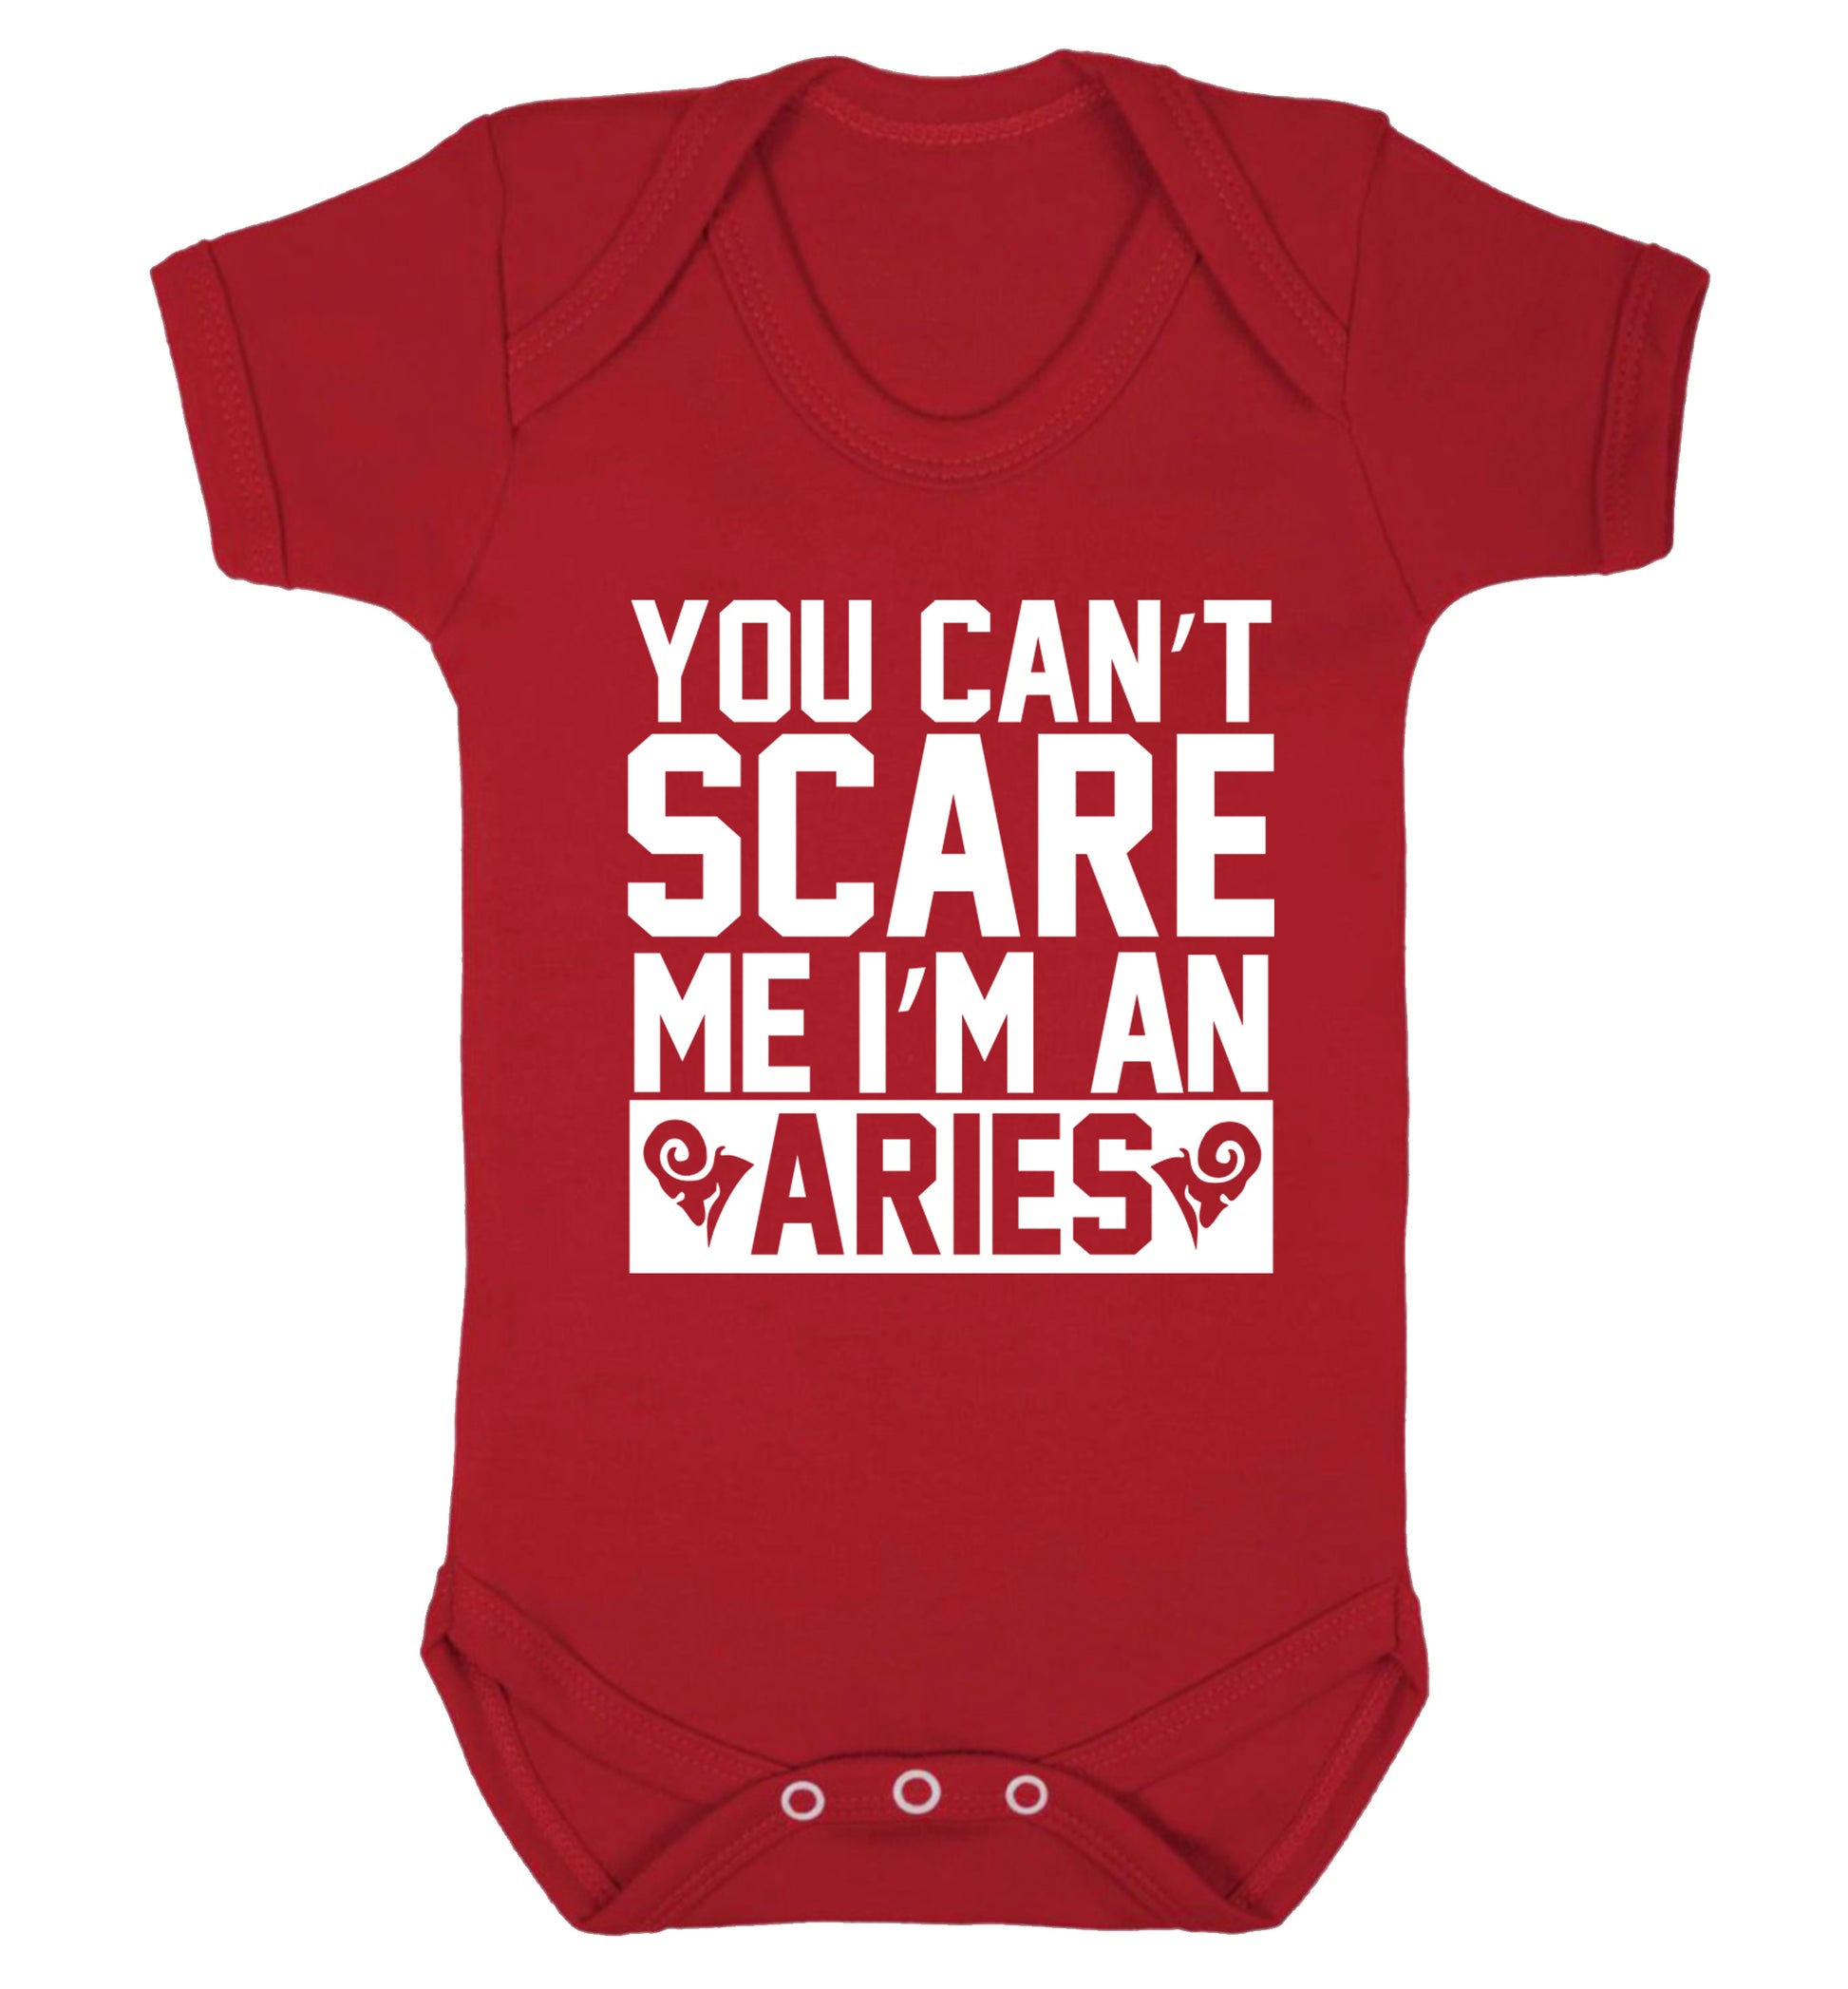 You can't scare me I'm an aries Baby Vest red 18-24 months